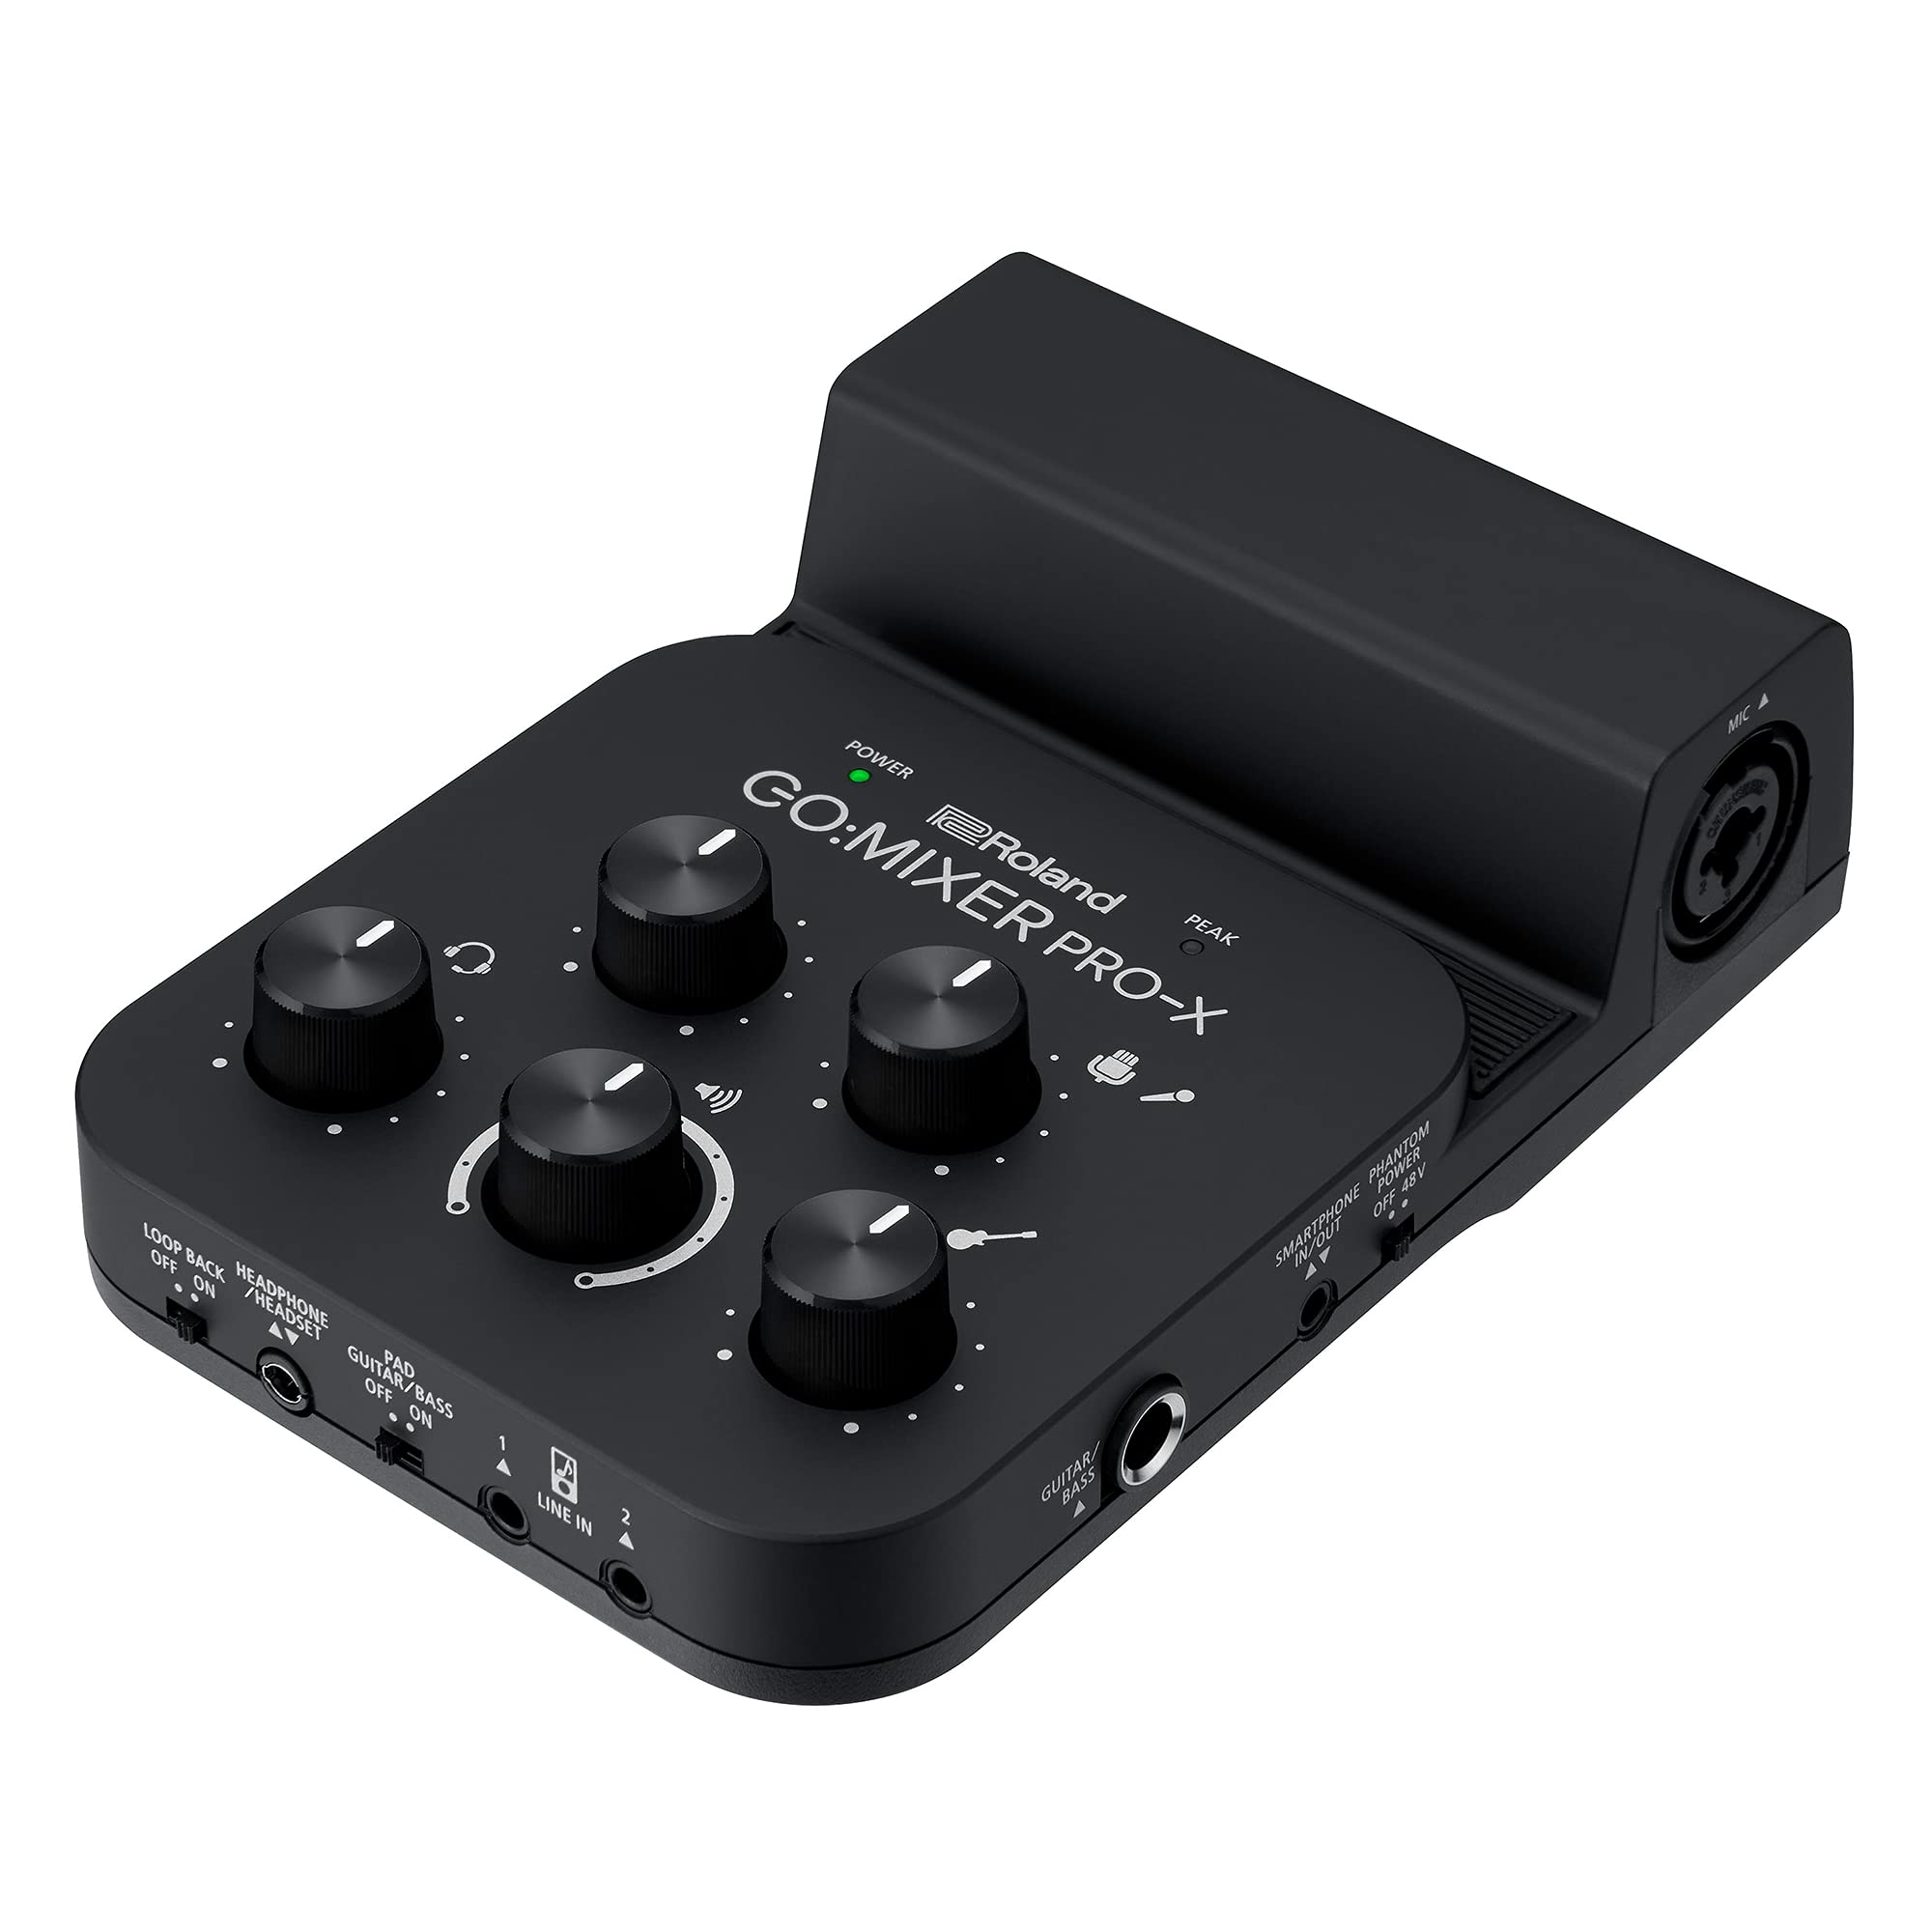 Roland  GO:MIXER PRO-X Audio Mixer for Smartphones | Connect and Mix up to 7 Audio Sources | Add Studio Quality Audio to your Social Content and Livestreams